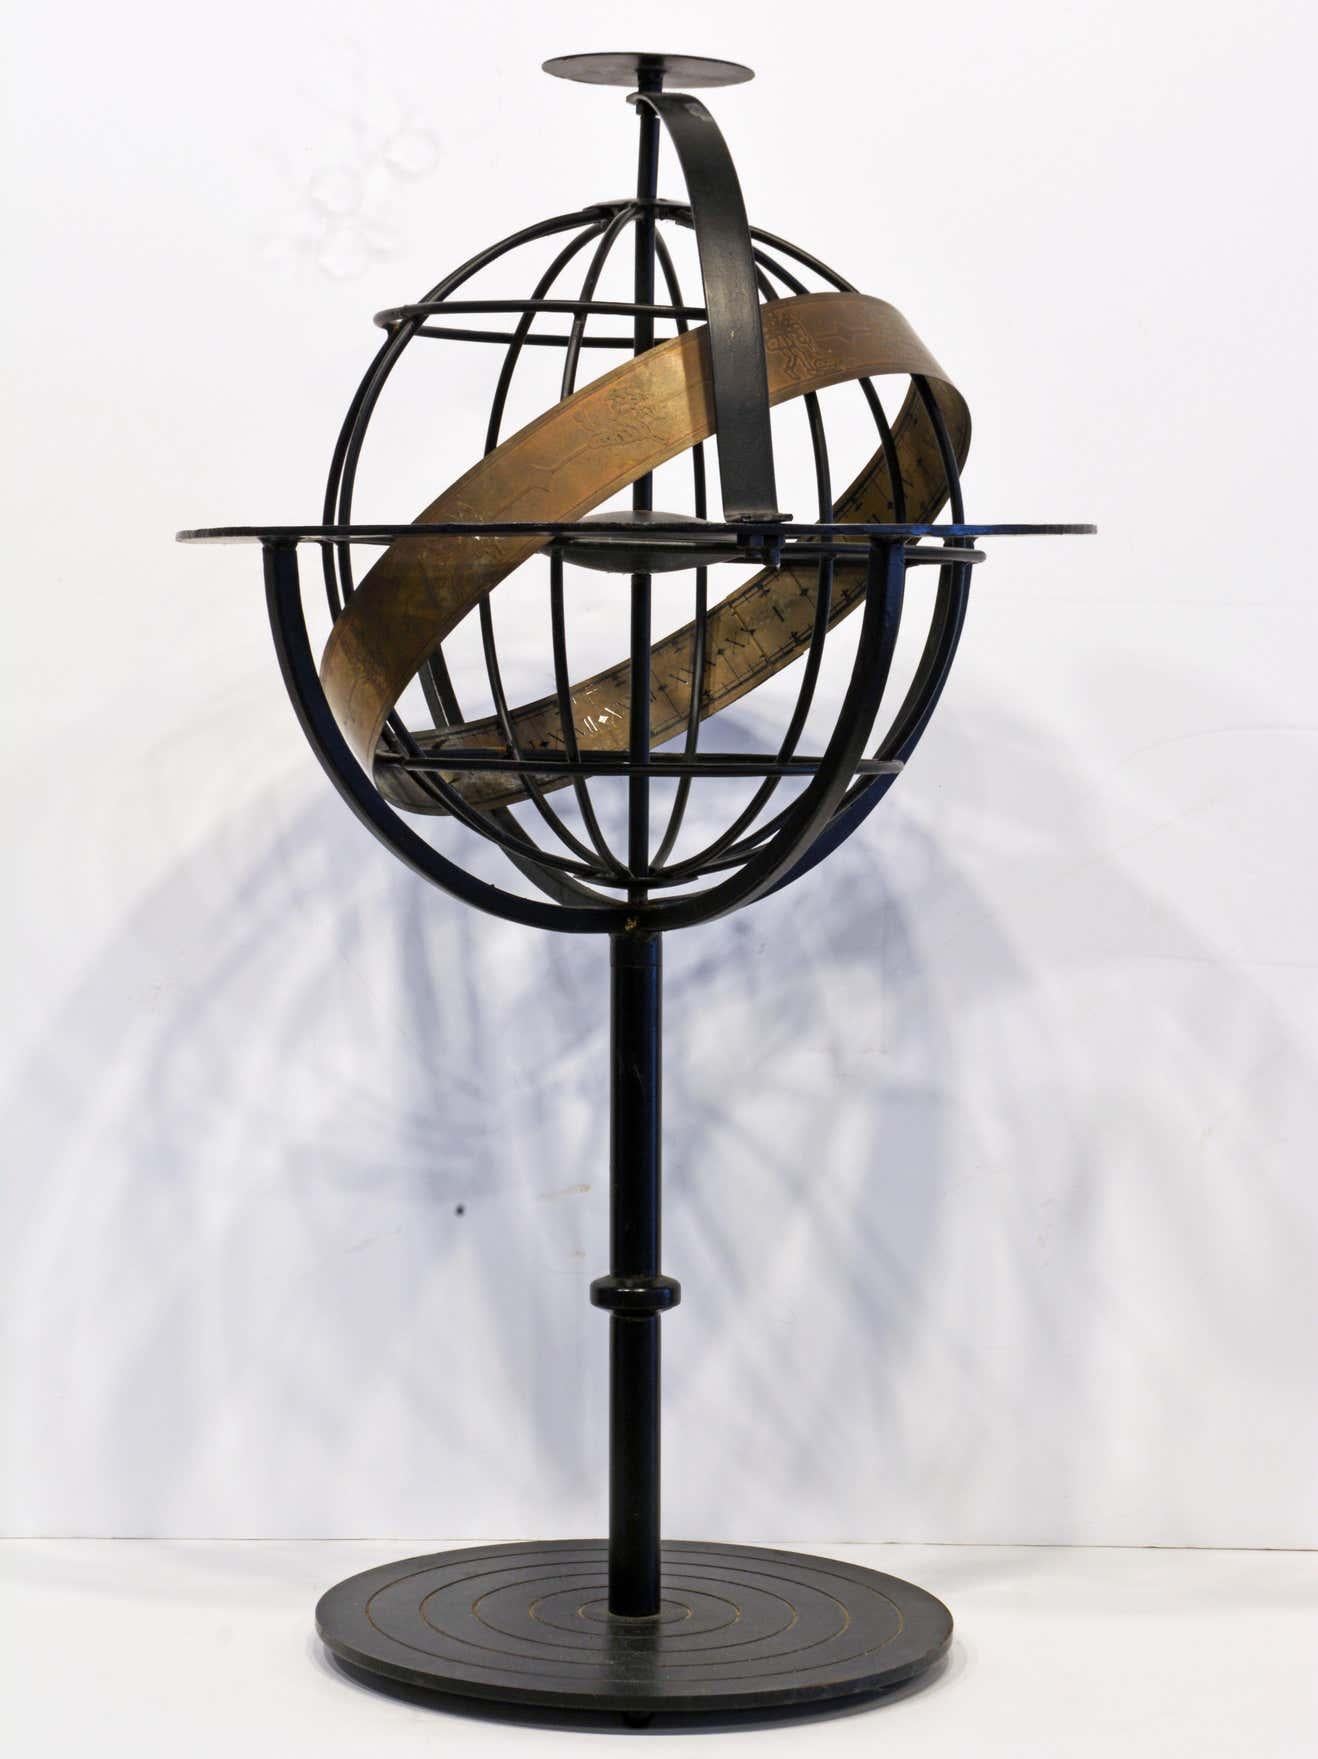 Standing 30 inches tall and designed in the 'form follows function' way this sphere or globe has a great aesthetic presence as a sculpture and without doubt a function for people interested in astrology and astronomy. Constructed of black painted